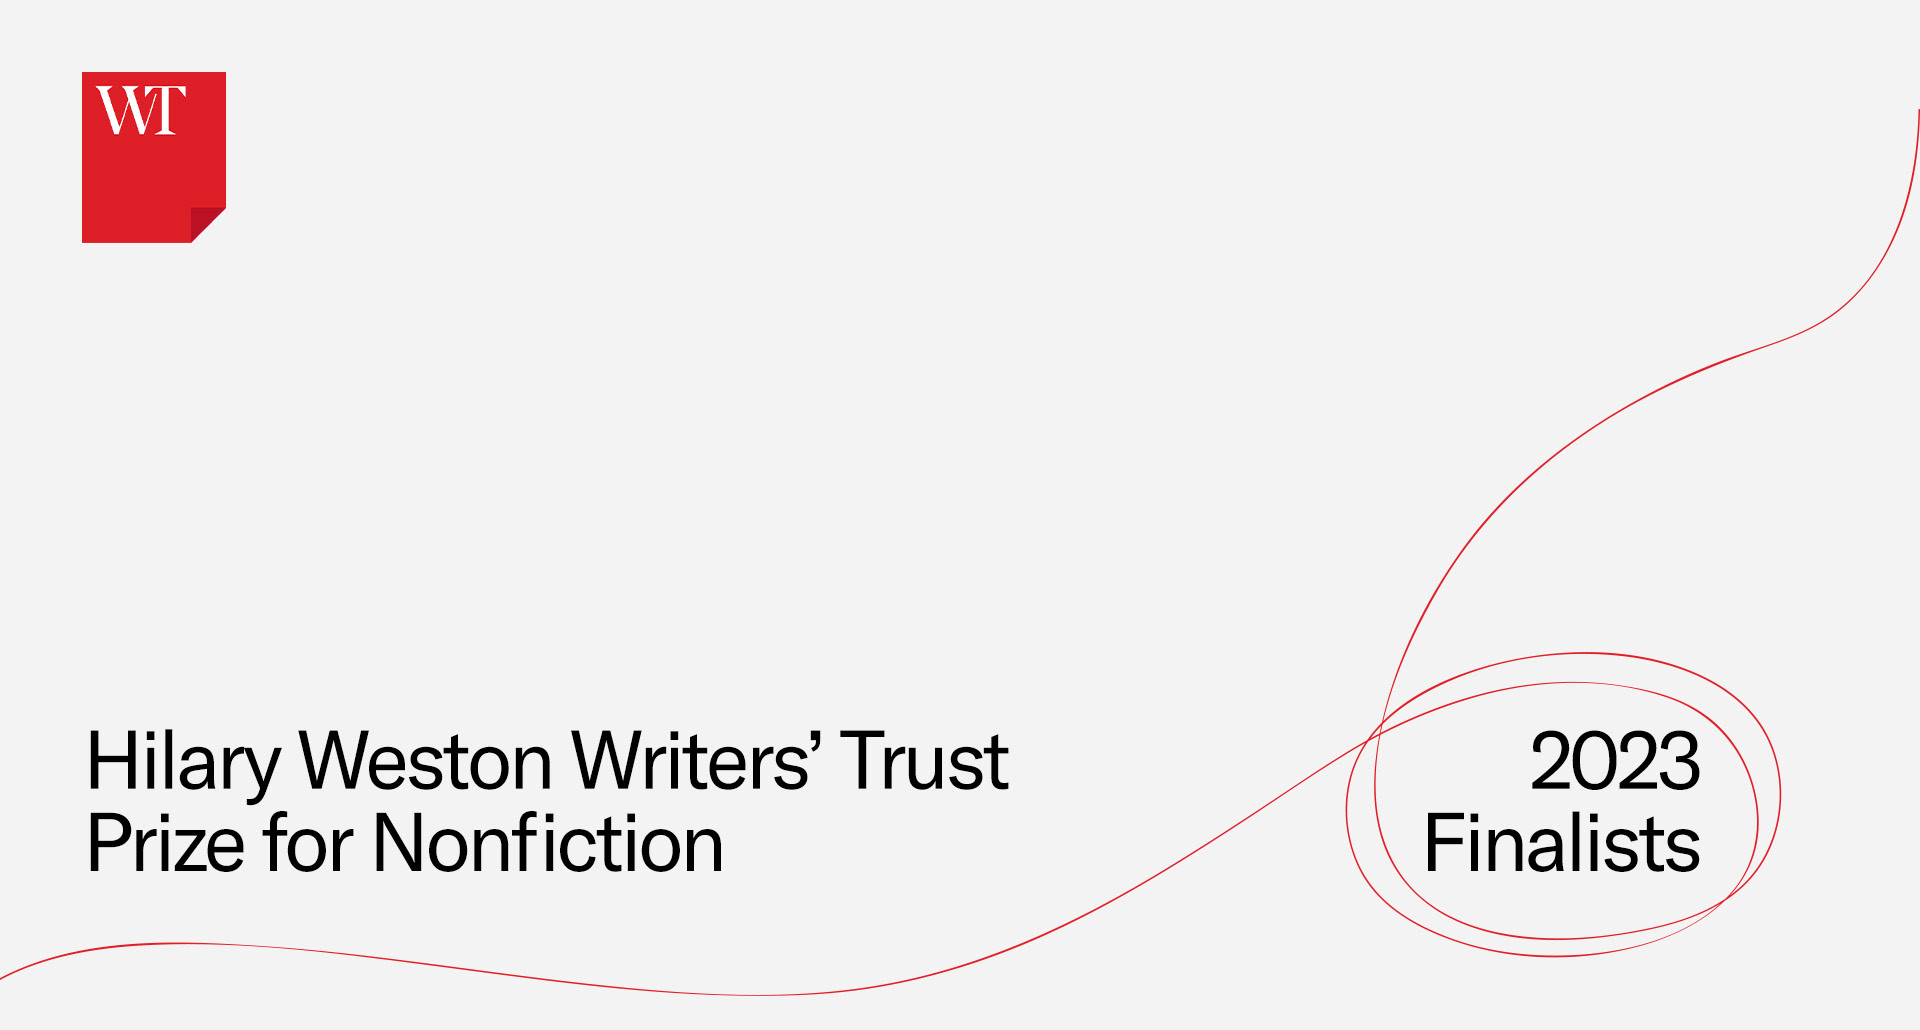 grey banner image with Writers' Trust logo top left. Text reads "Hilary Weston Writers' Trust Prize for Nonfiction 2023 finalists" with red sweeping line from bottom left to top right